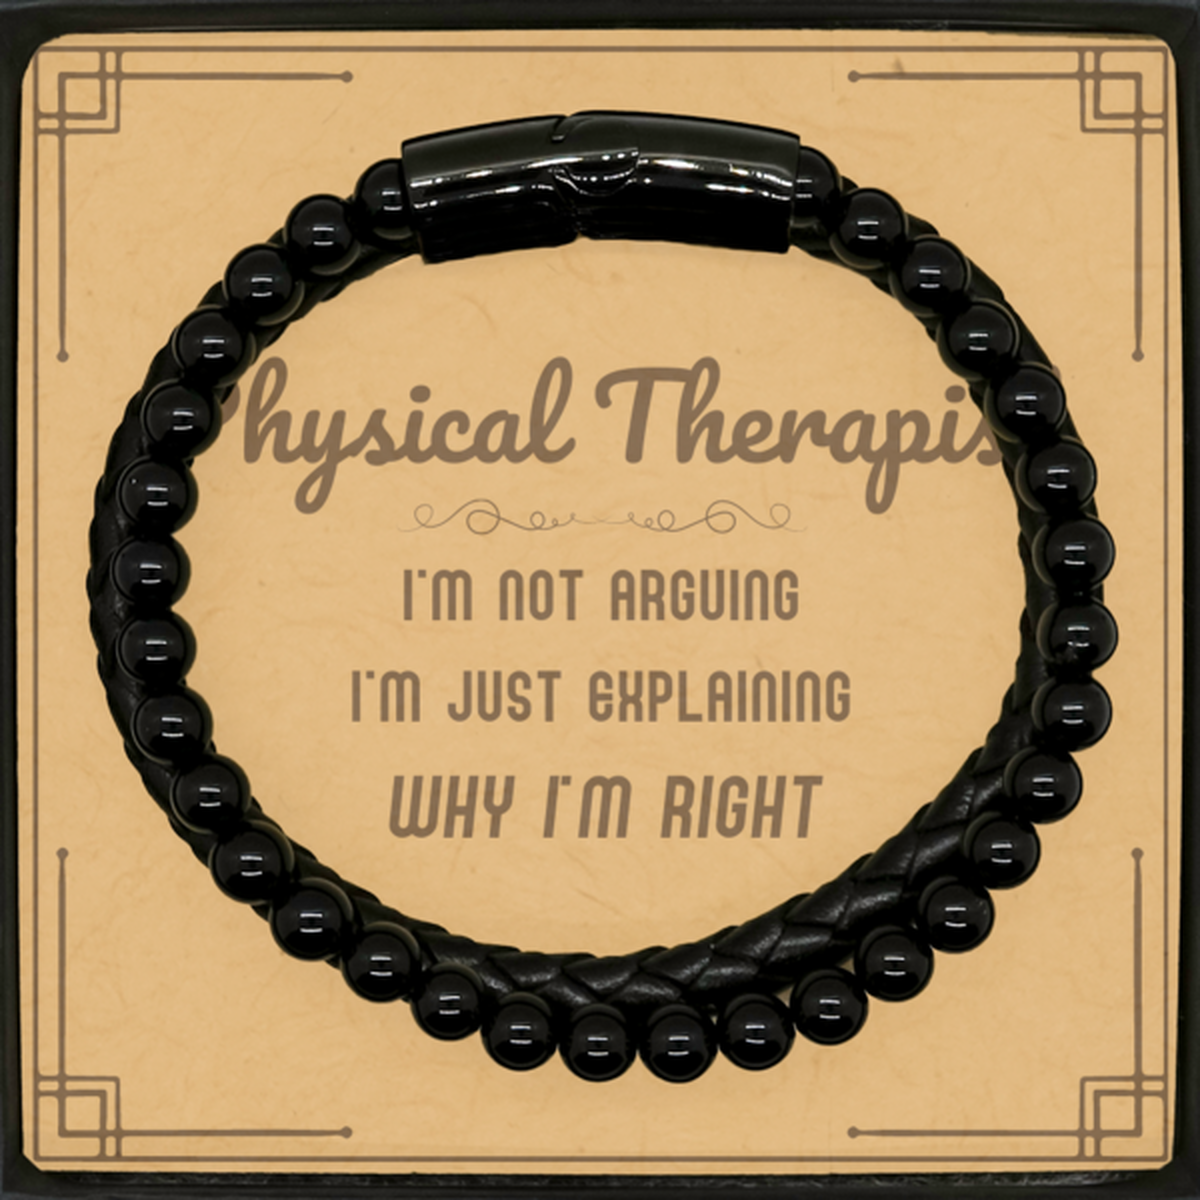 Physical Therapist I'm not Arguing. I'm Just Explaining Why I'm RIGHT Stone Leather Bracelets, Funny Saying Quote Physical Therapist Gifts For Physical Therapist Message Card Graduation Birthday Christmas Gifts for Men Women Coworker